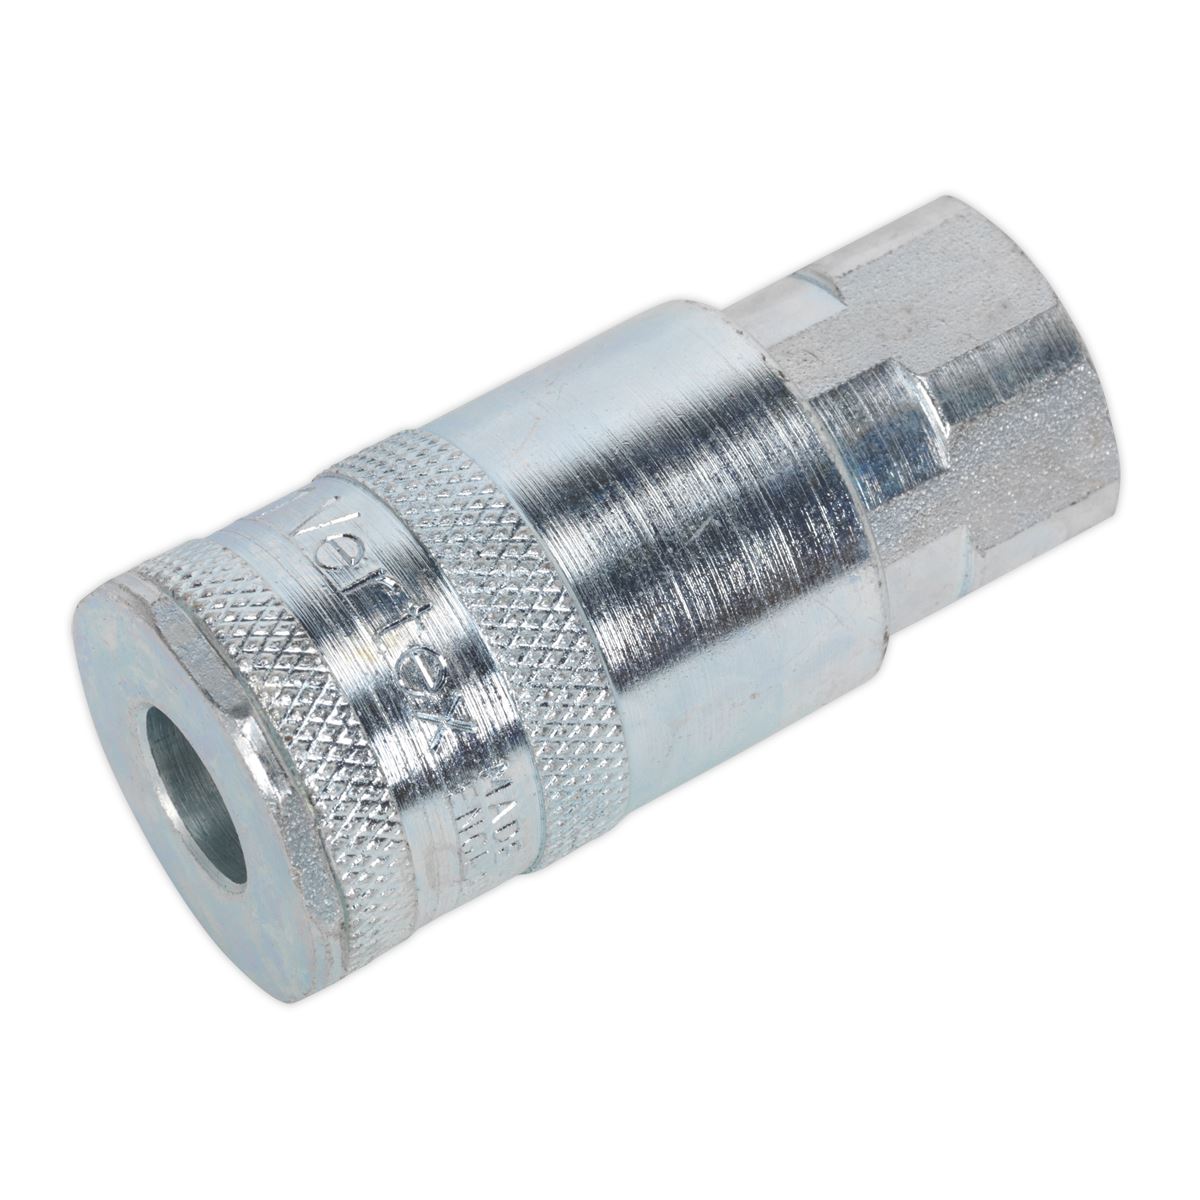 PCL Coupling Body Female 3/8"BSP